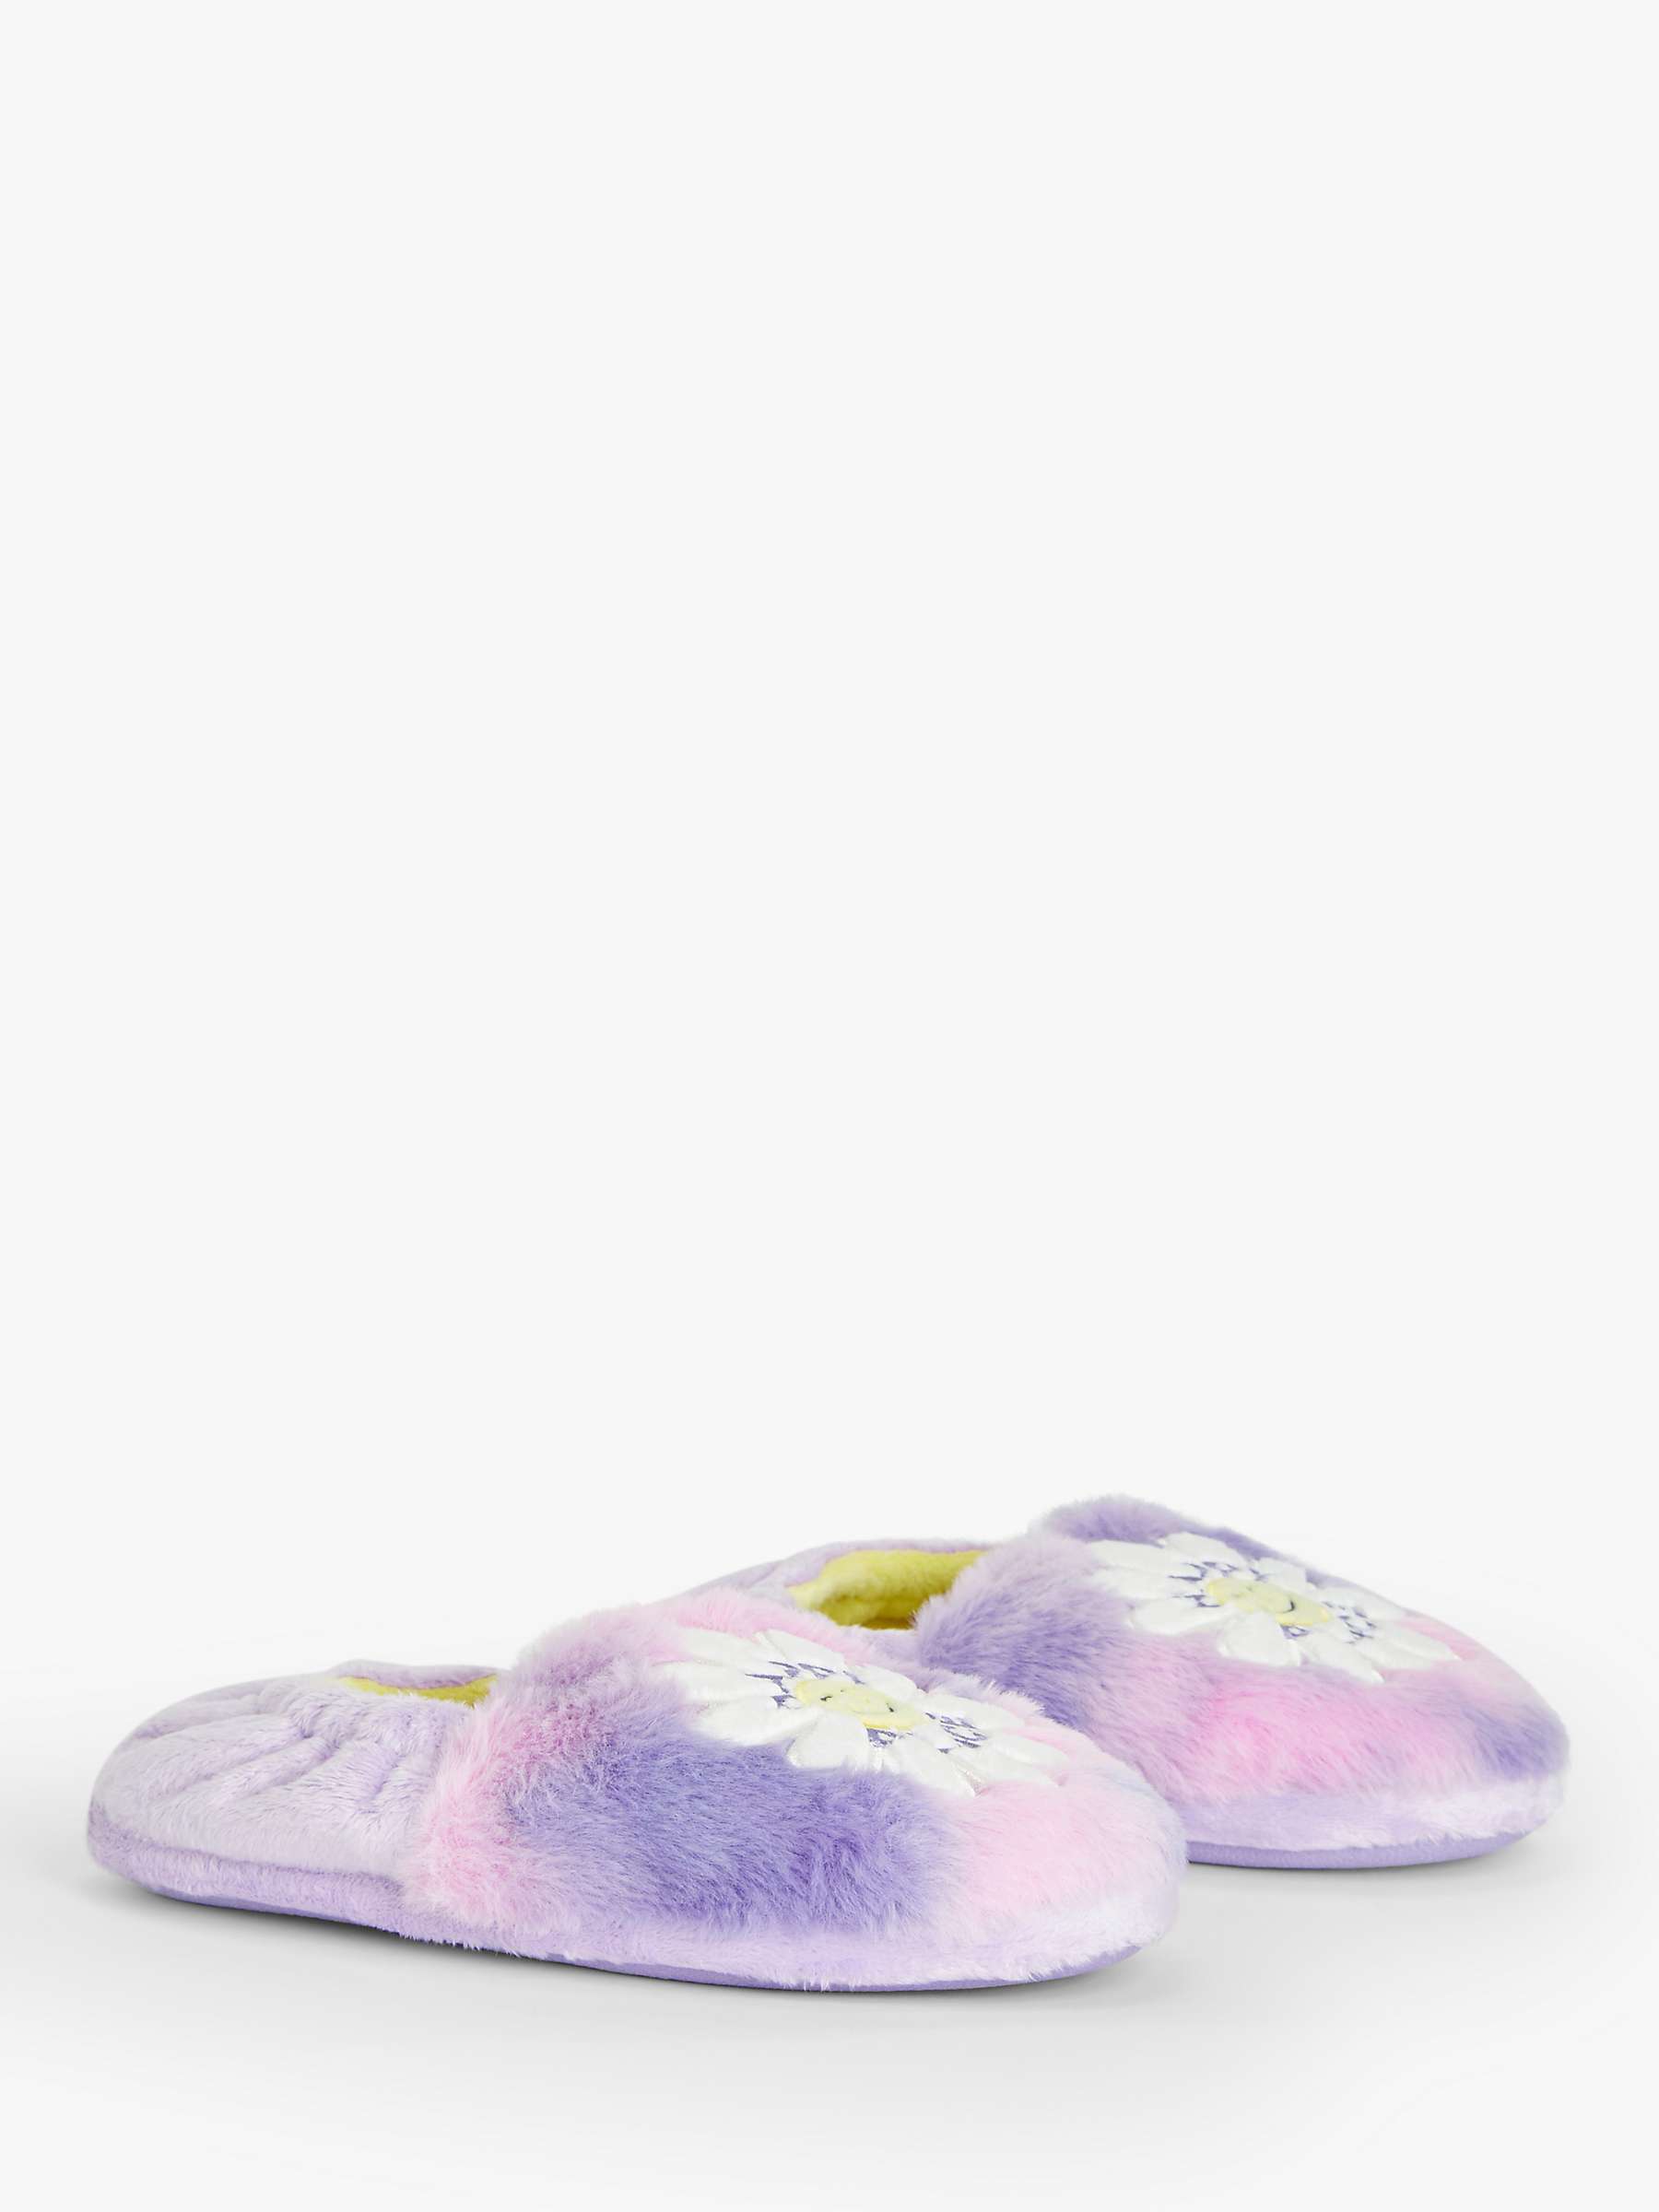 Buy John Lewis Kids' Happy Place Daisy Slippers Online at johnlewis.com